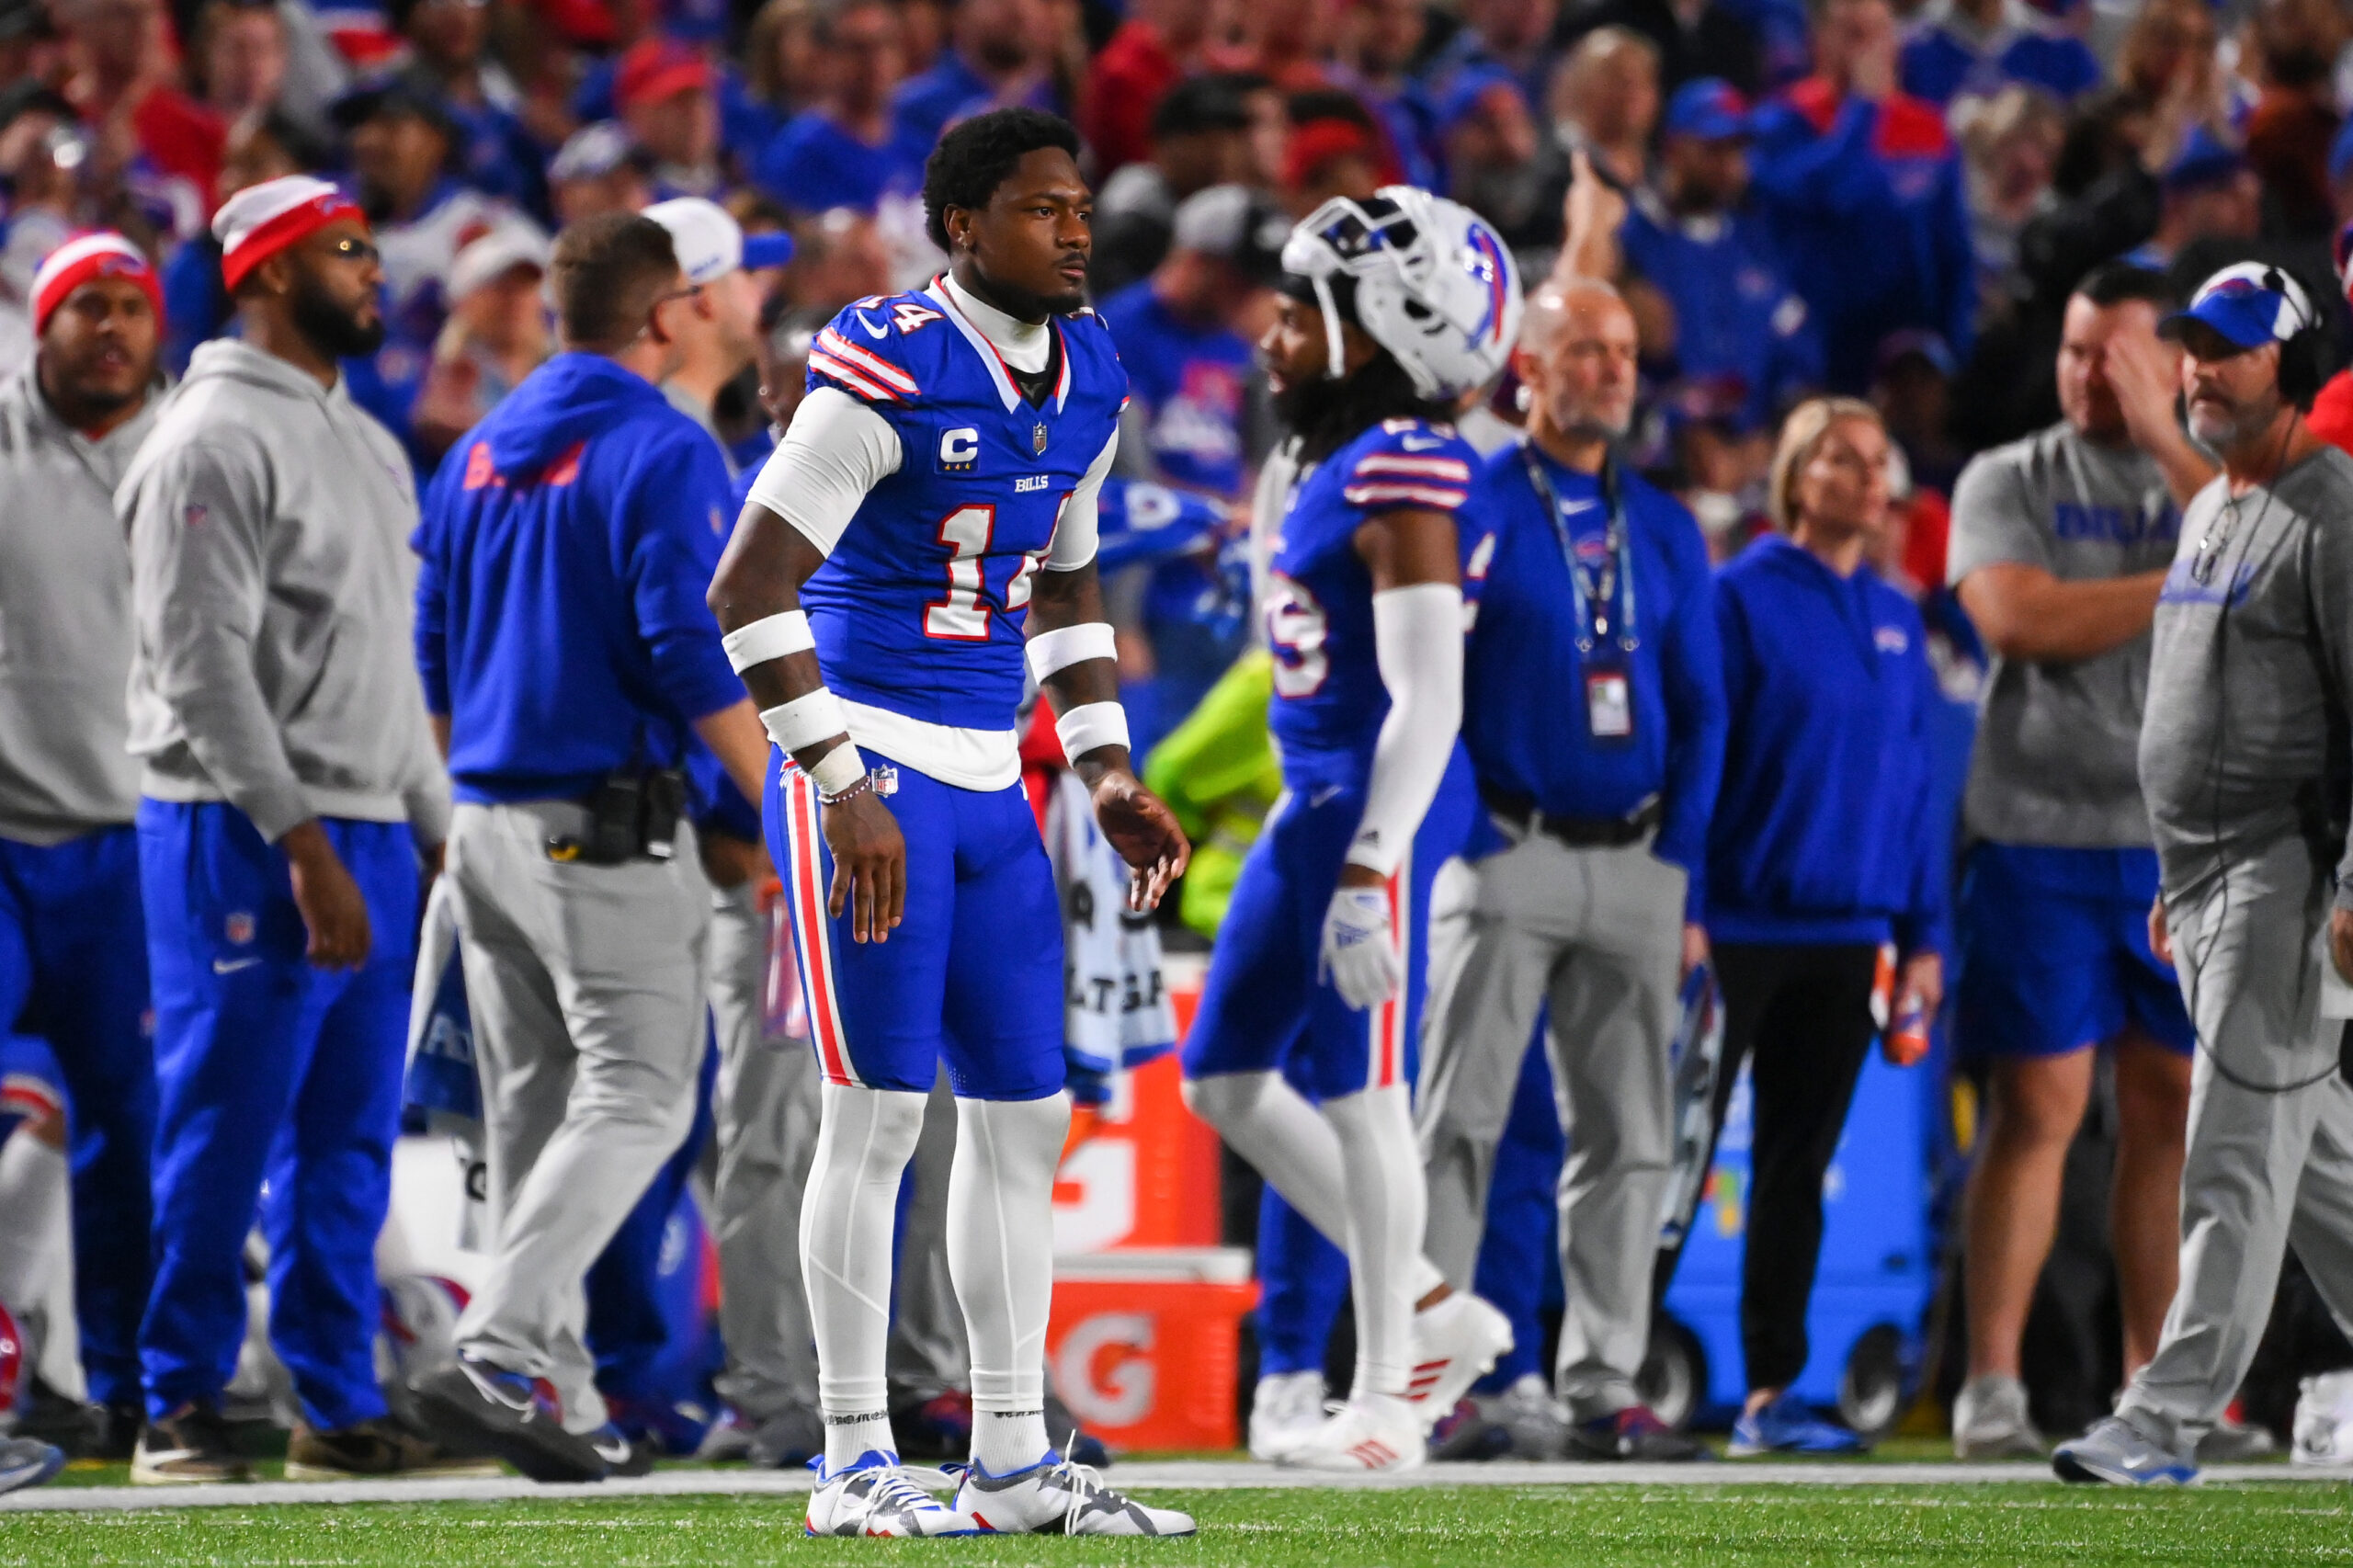 Stefon Diggs gave pre-game speech before Bills win: ‘That’s what leaders do’